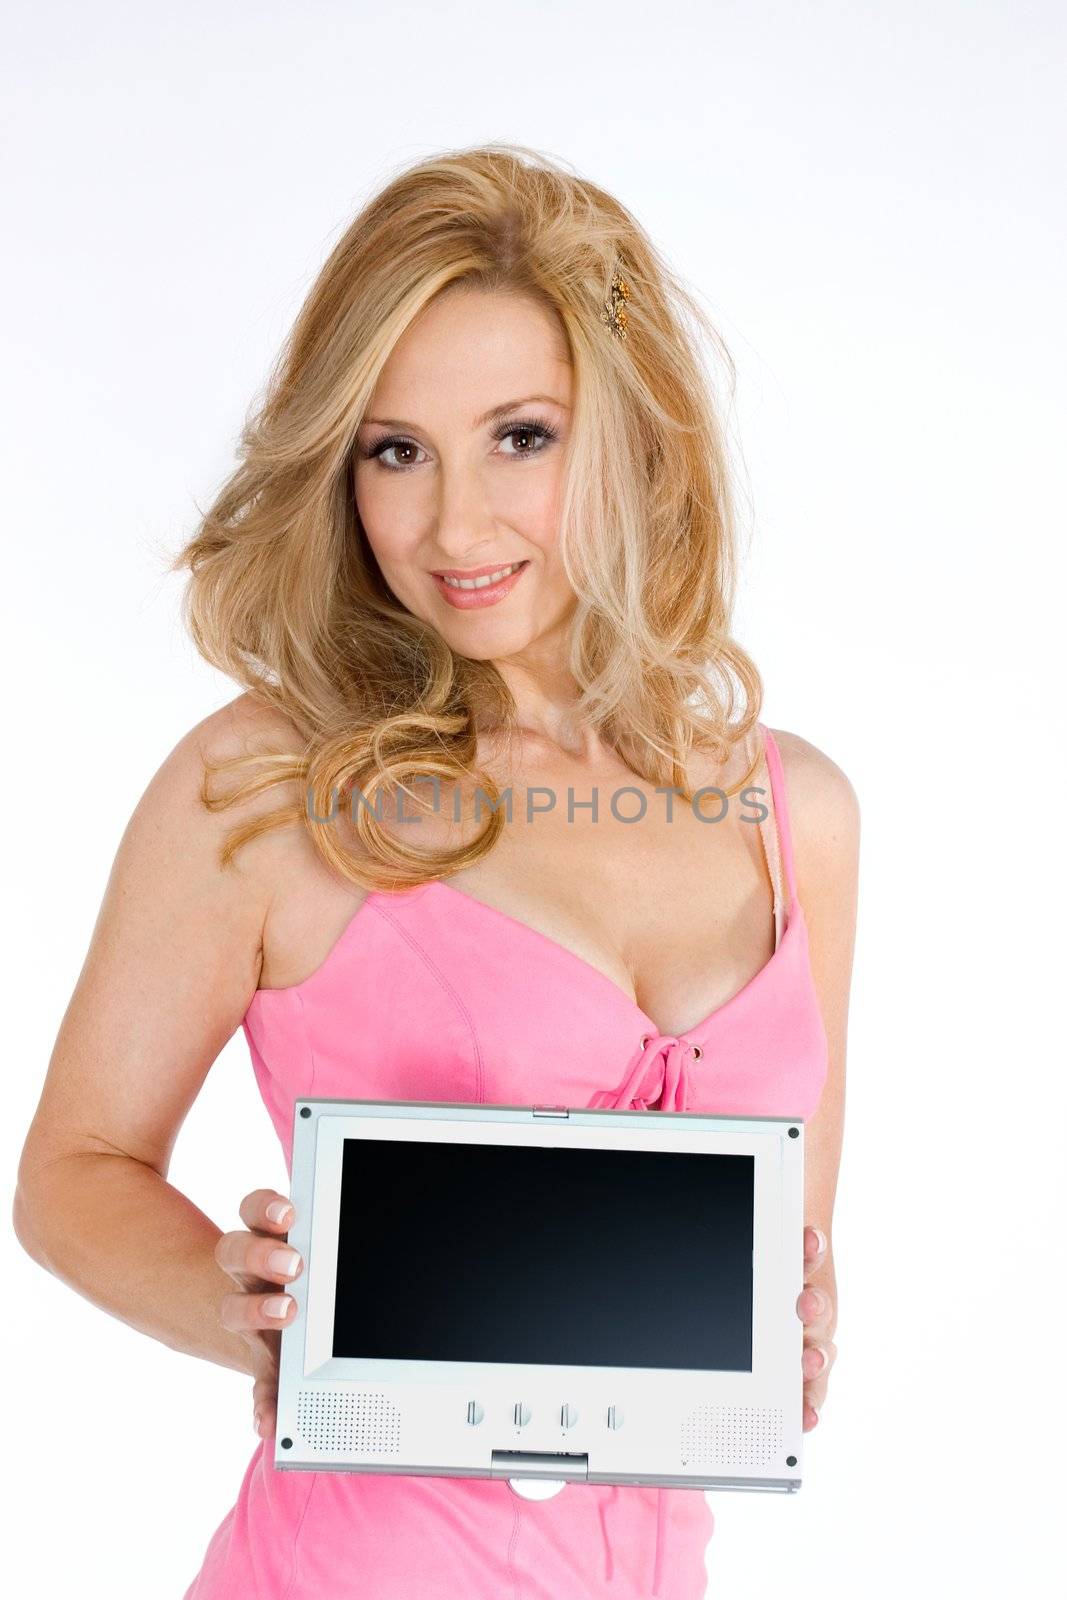 Woman in pink dress showcasing electronic equipment with blank lcd screen ready to add a message or picture..